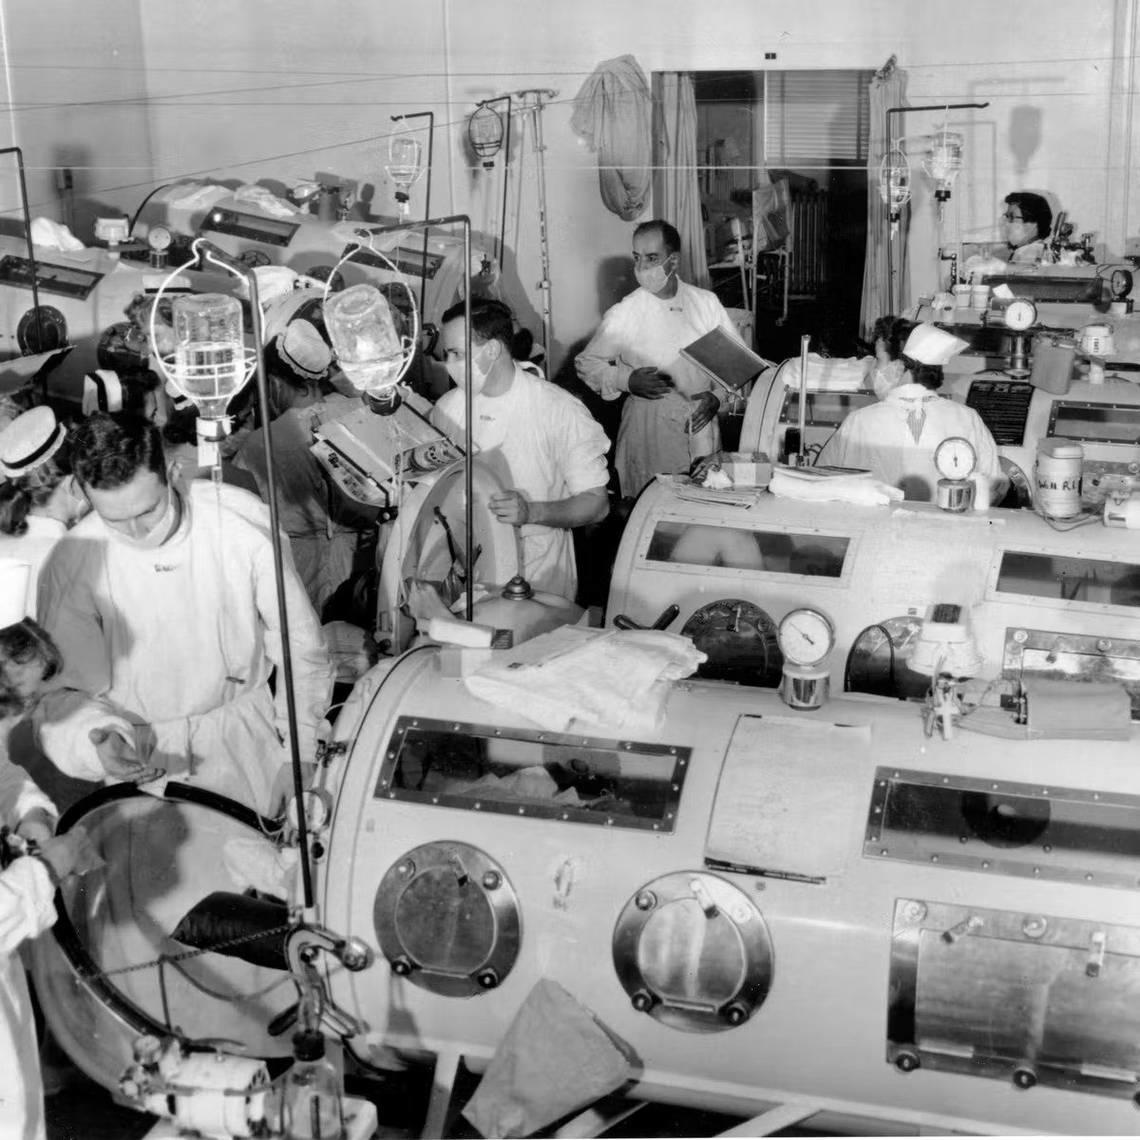 An emergency polio ward in Boston in 1955 equipped with iron lungs, pressurized respirators that acted as breathing muscles for polio victims, who often were paralyzed.